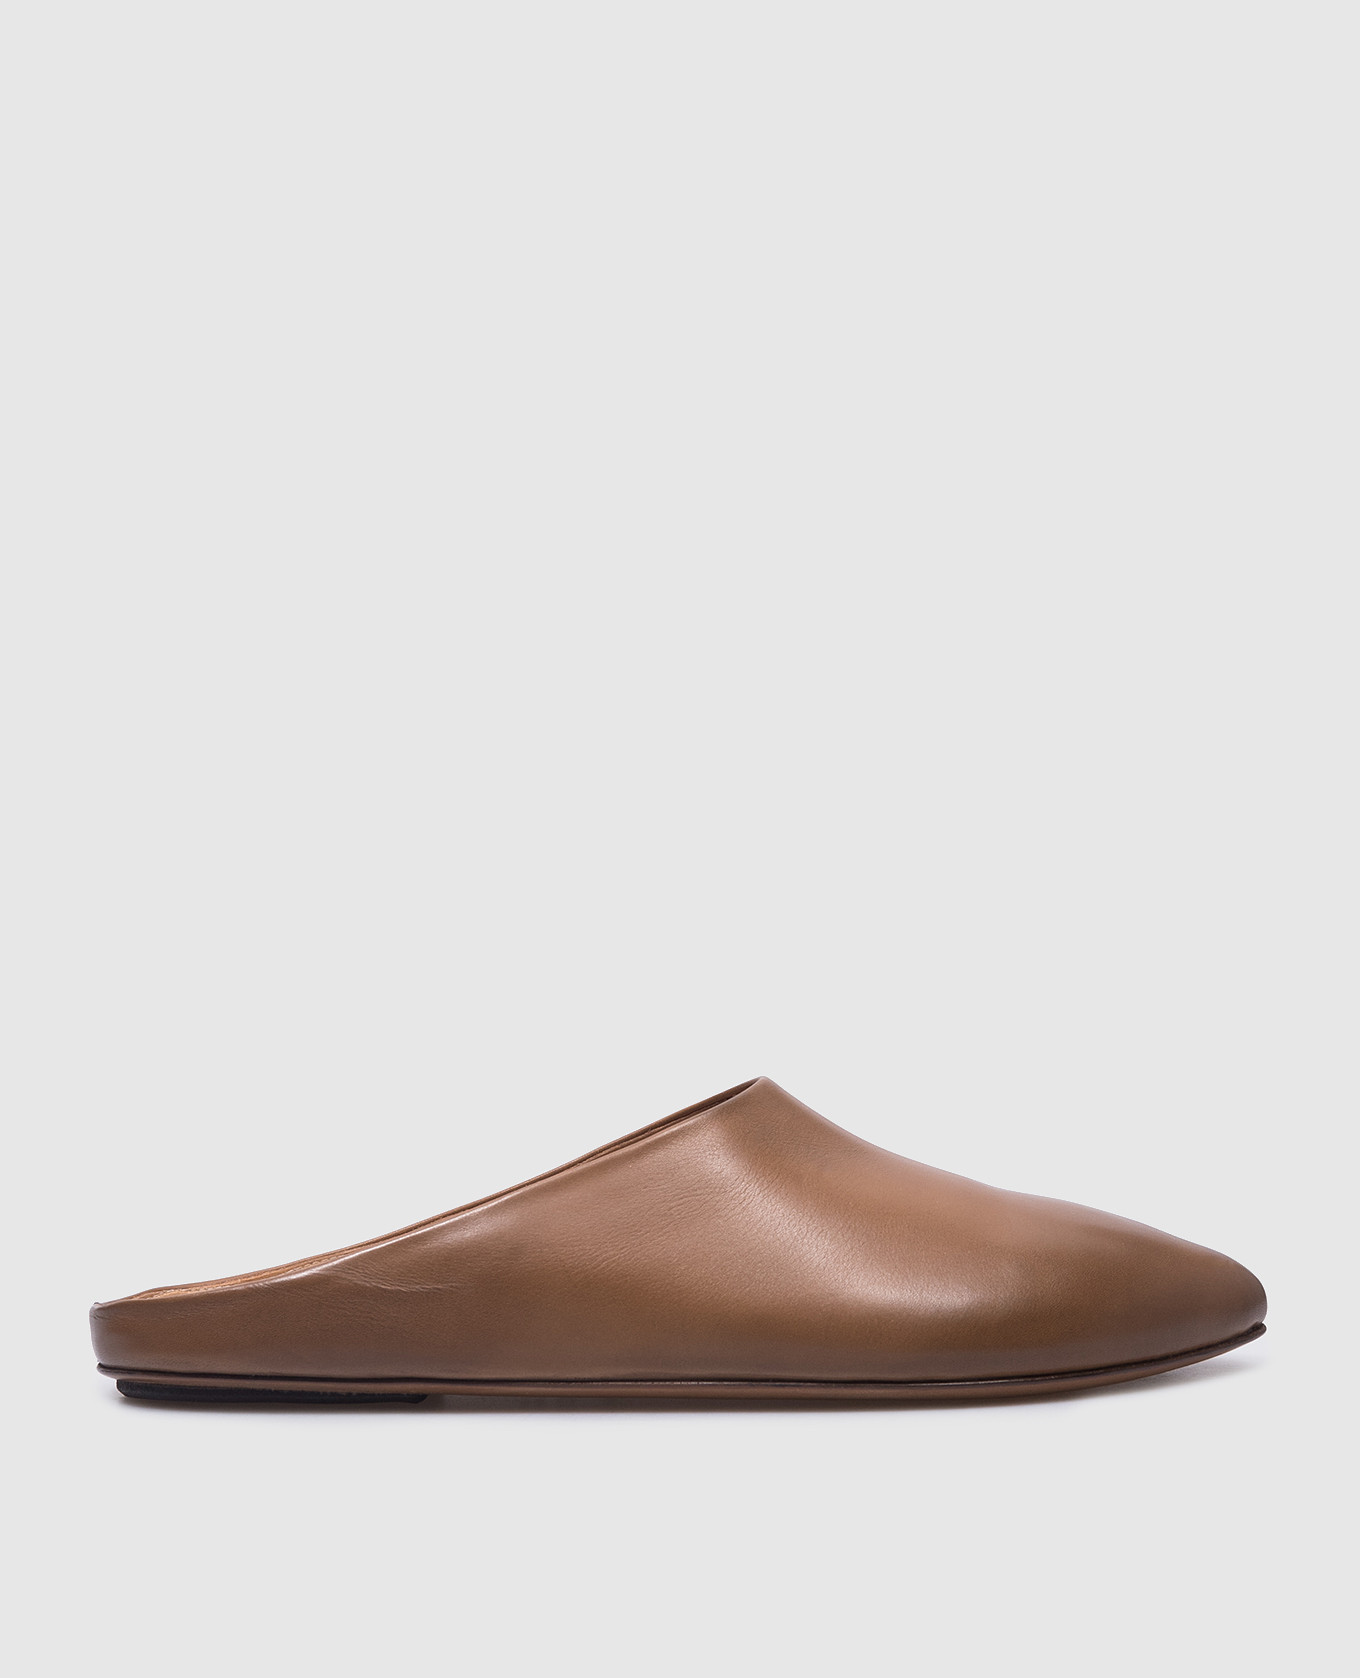 Noce brown leather mules